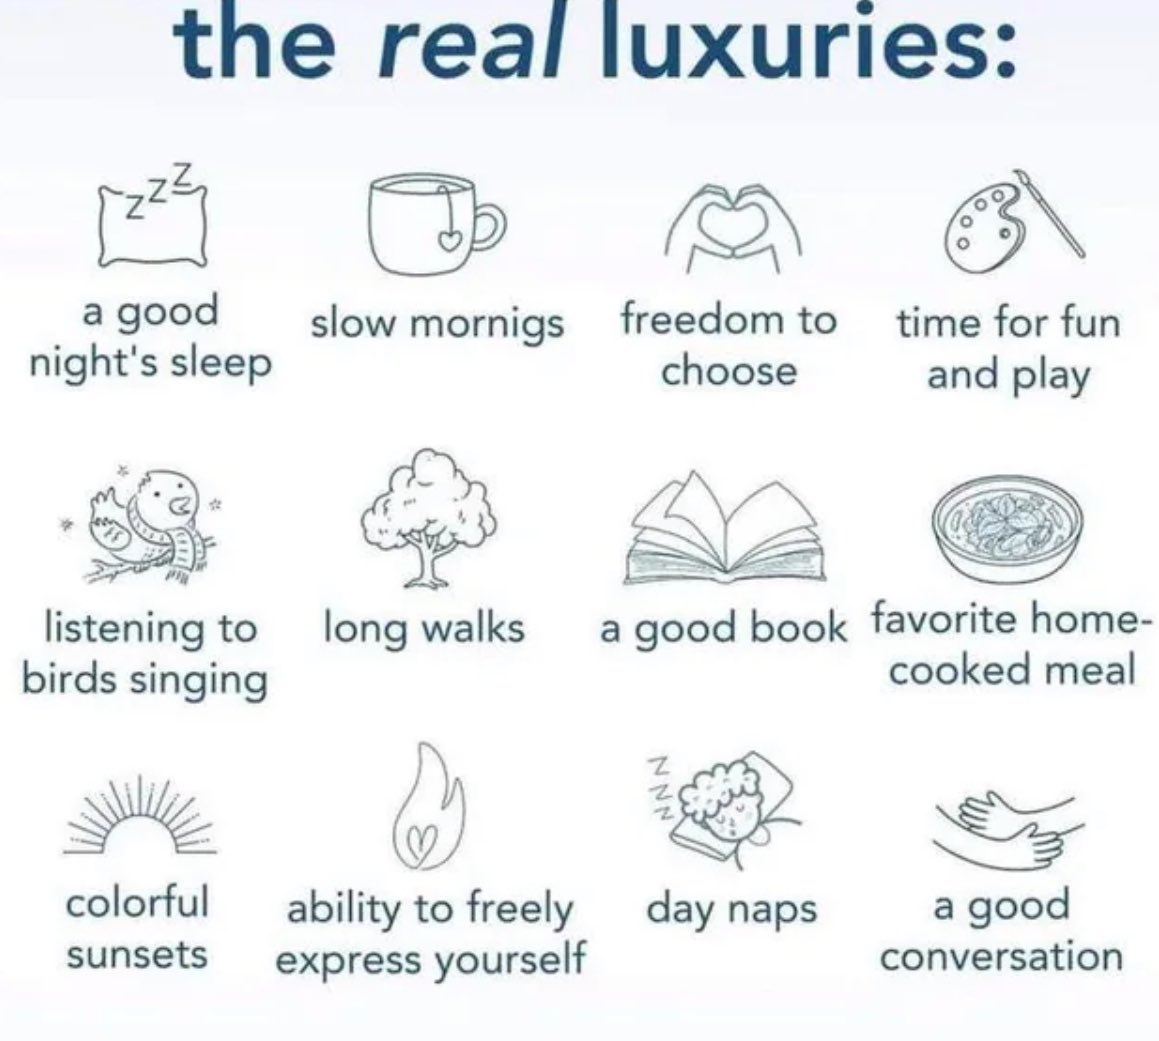 Real happiness is with these real luxuries 👇